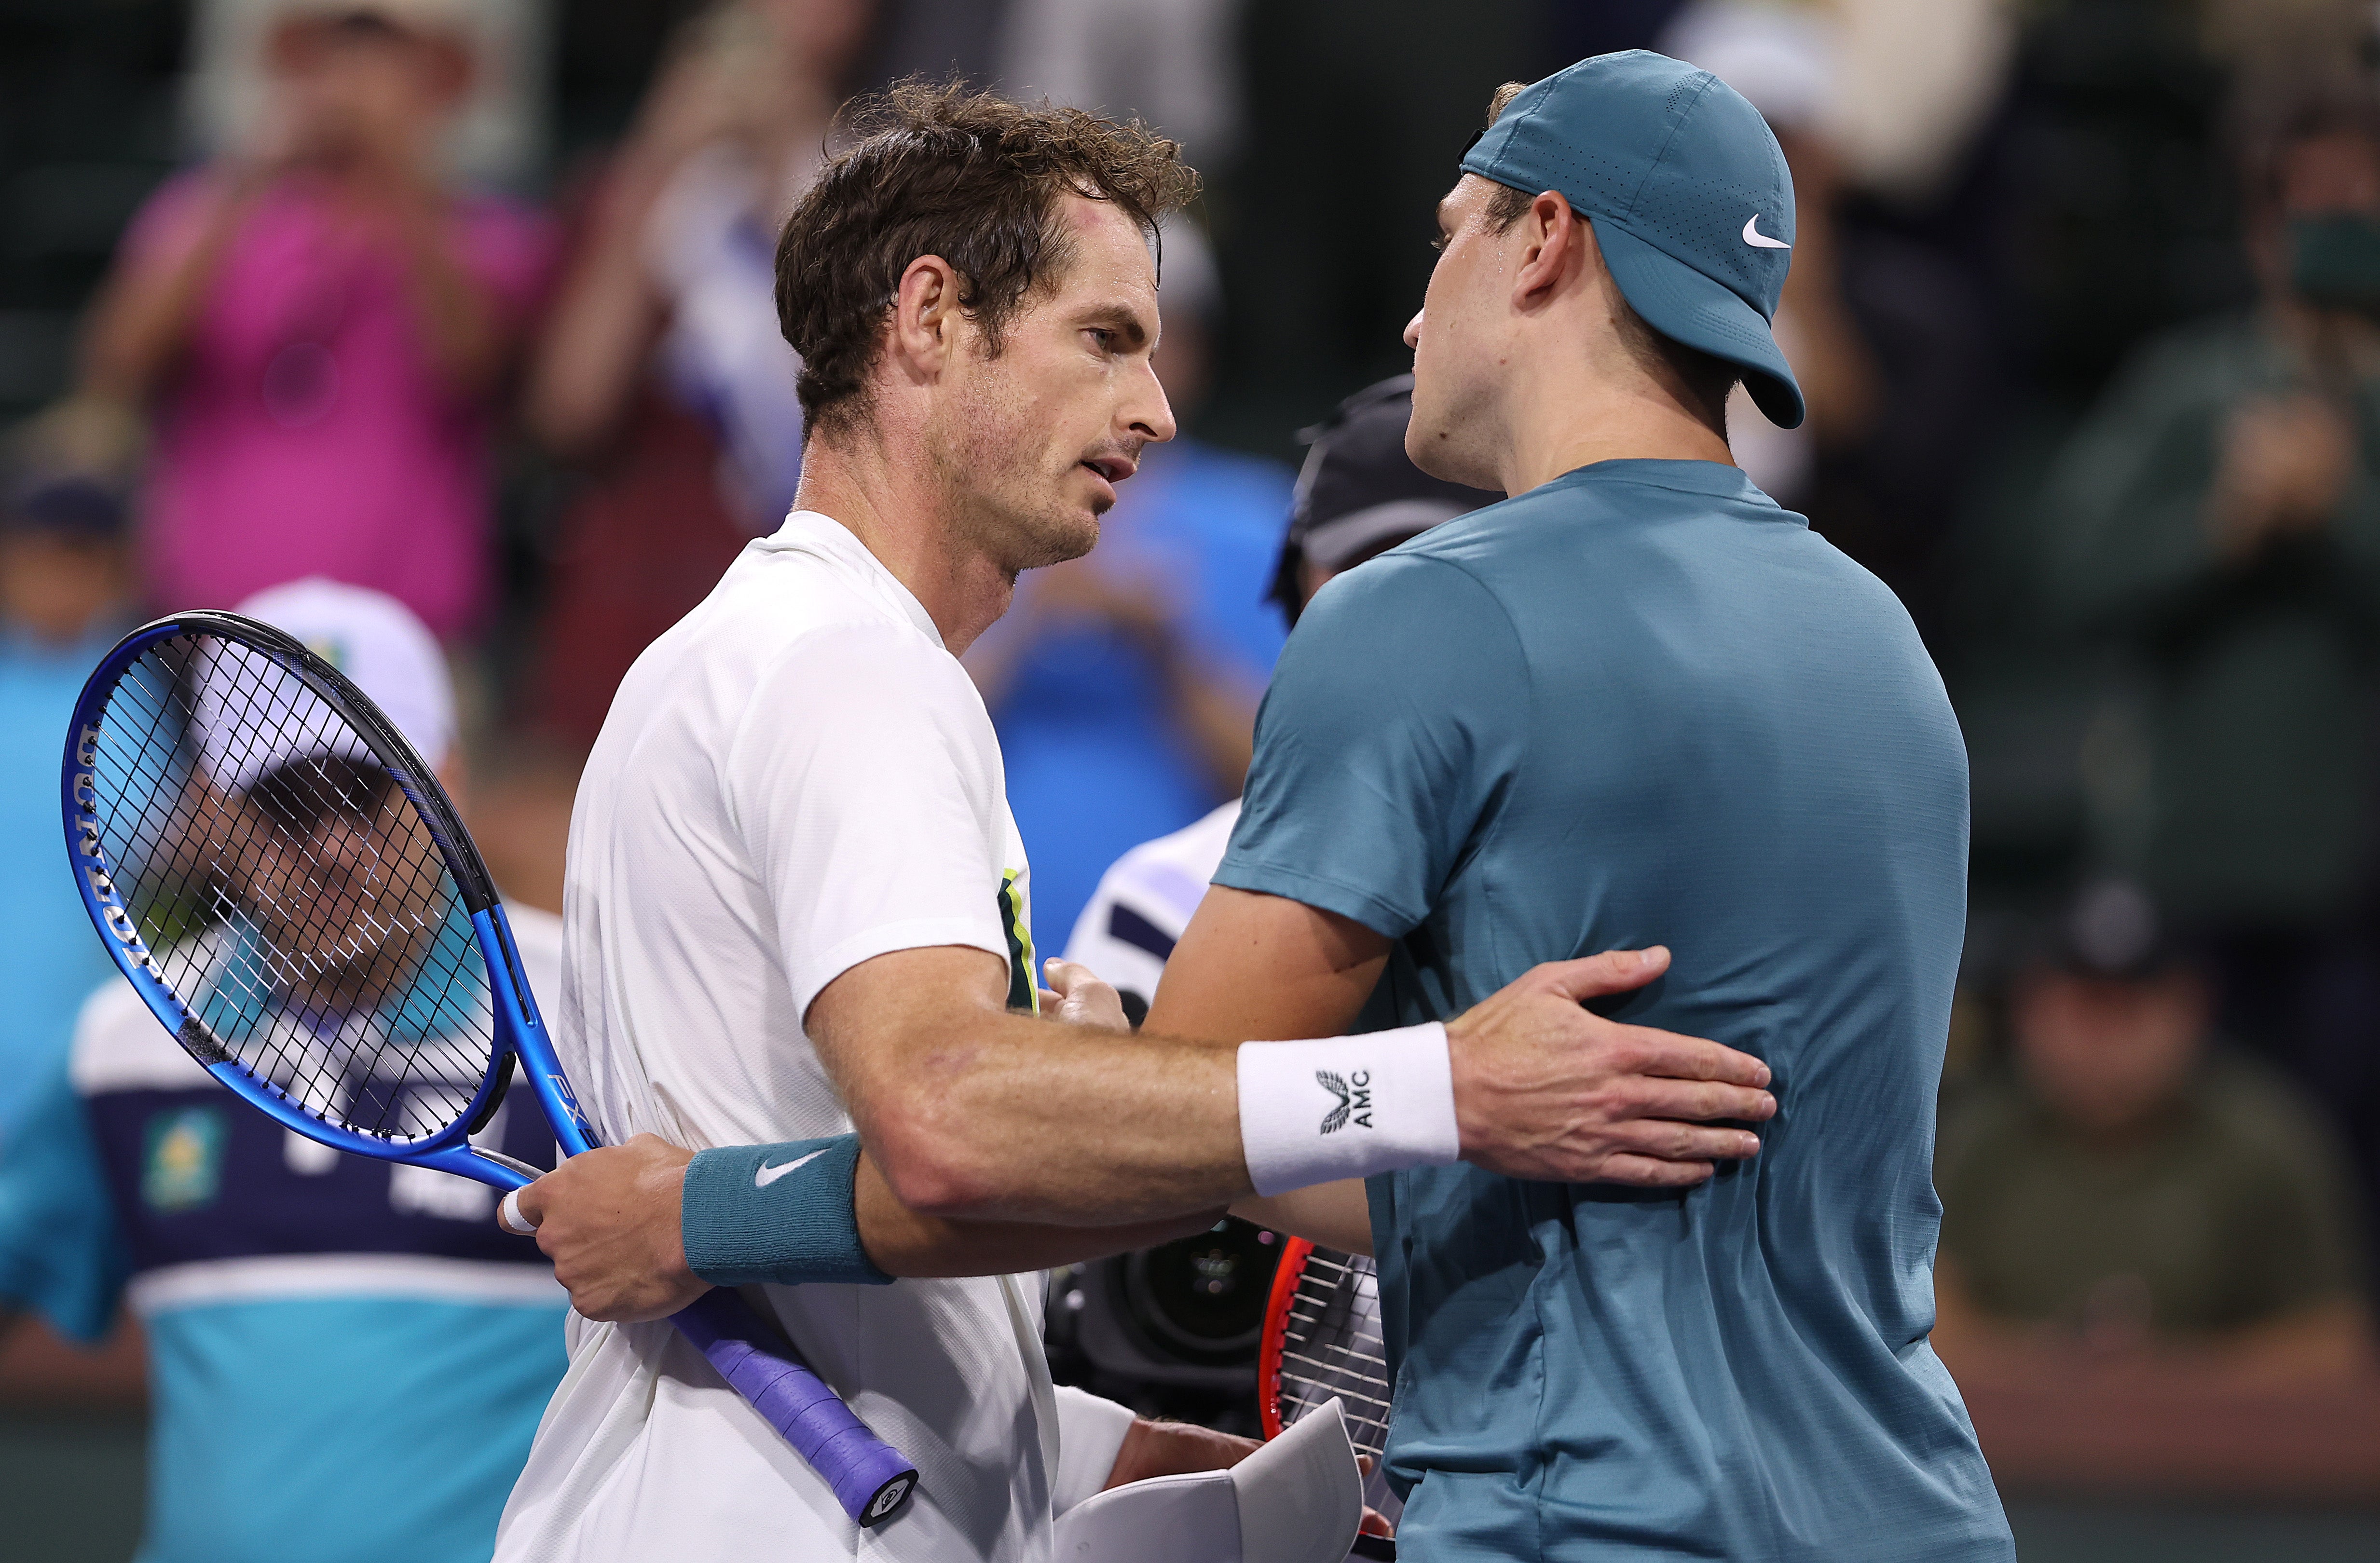 Draper and Murray exchanged a few words at the net after the younger man’s win